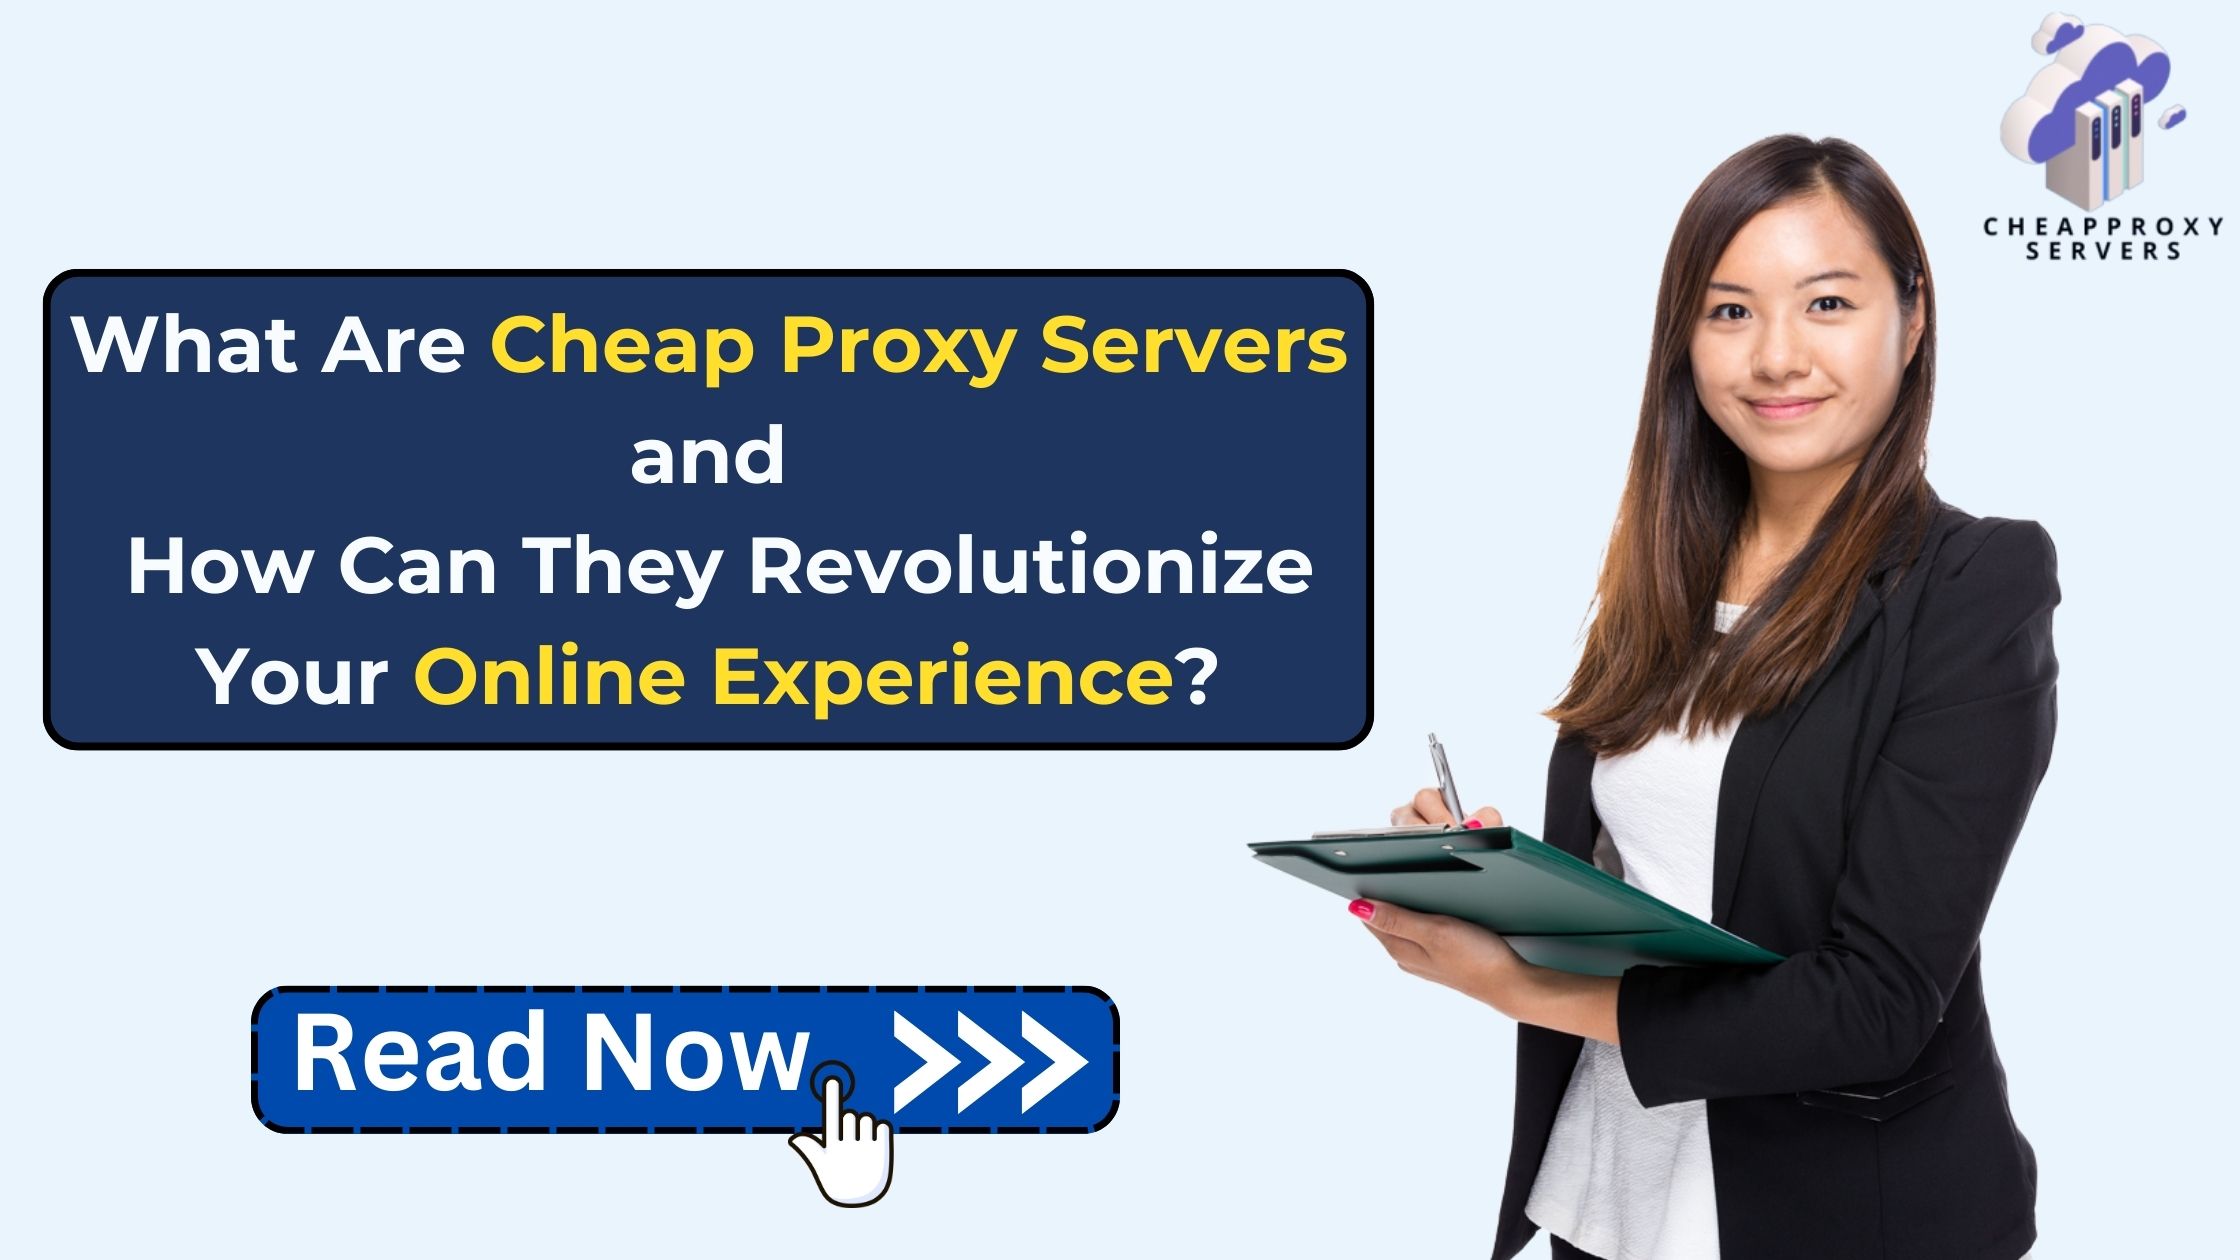 What Are Cheap Proxy Servers and How Can They Revolutionize Your Online Experience?